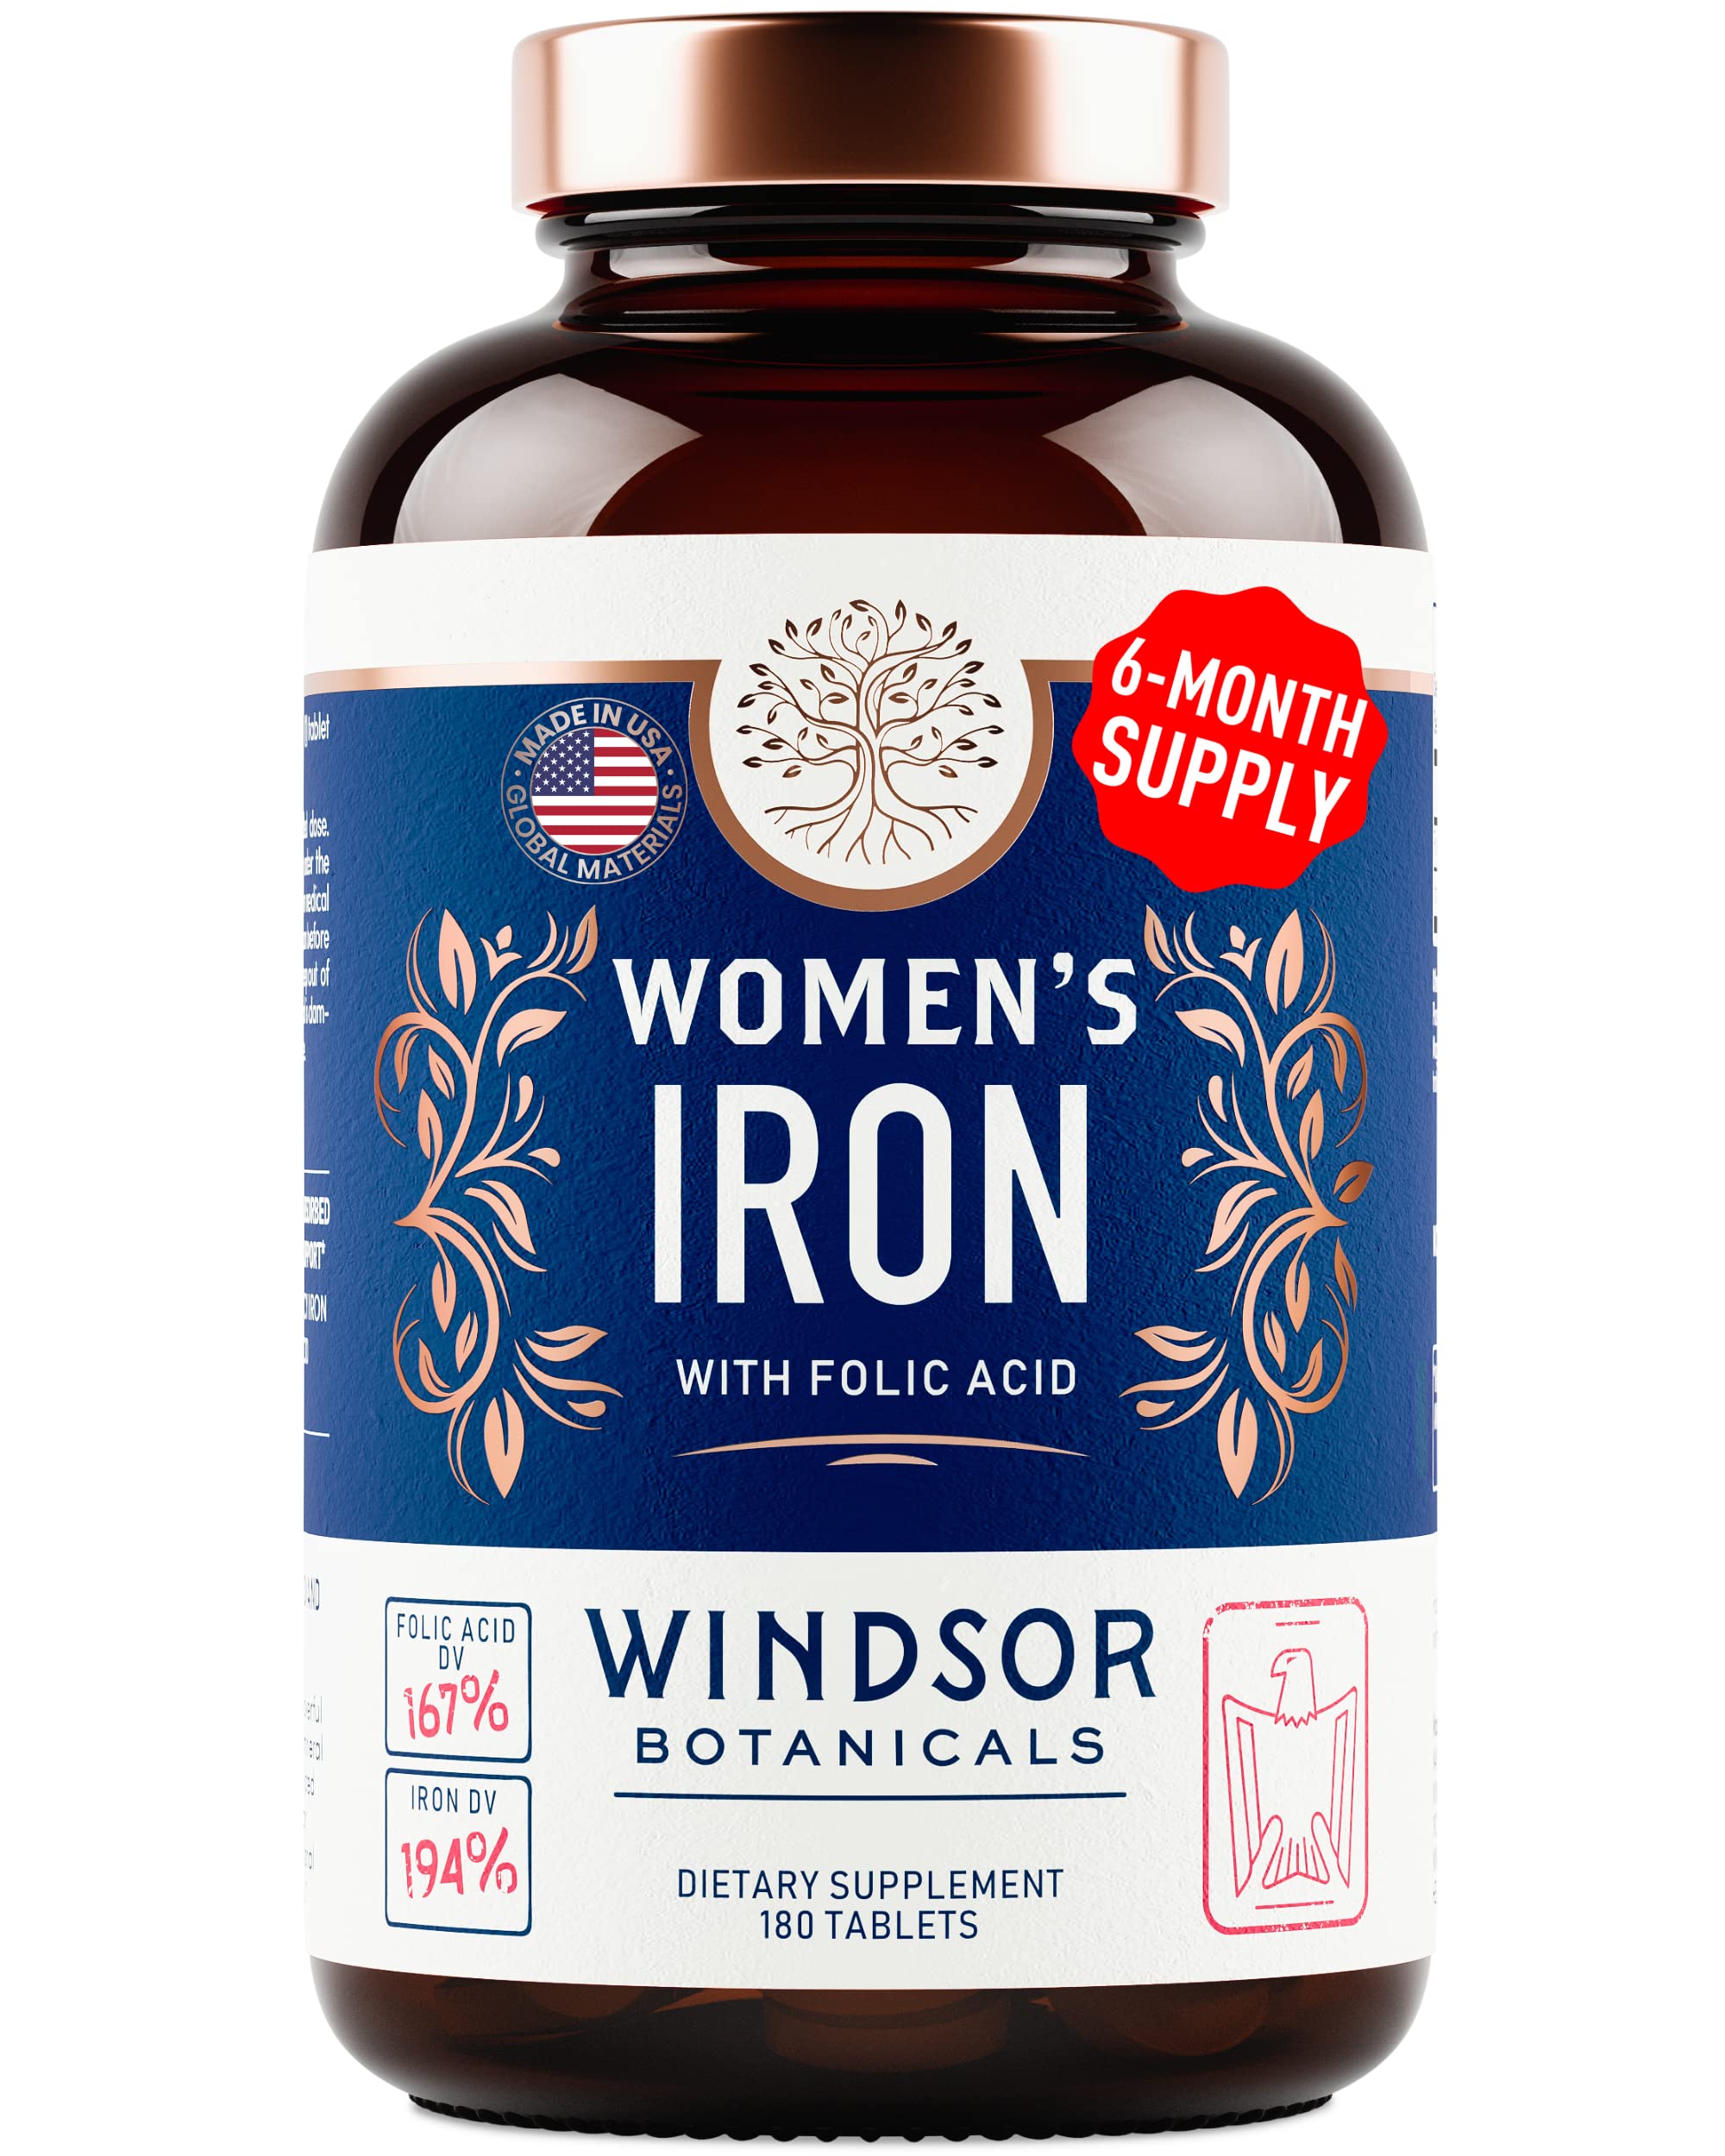 Iron Pills for Women - Iron Supplement for Women with Folic Acid - 6 Month Supply - Anemia, Period, Pregnancy Support Iron Supplements - Ferrous Sulfate, Folate Vitamin B9-180 Vegan Iron Tablets